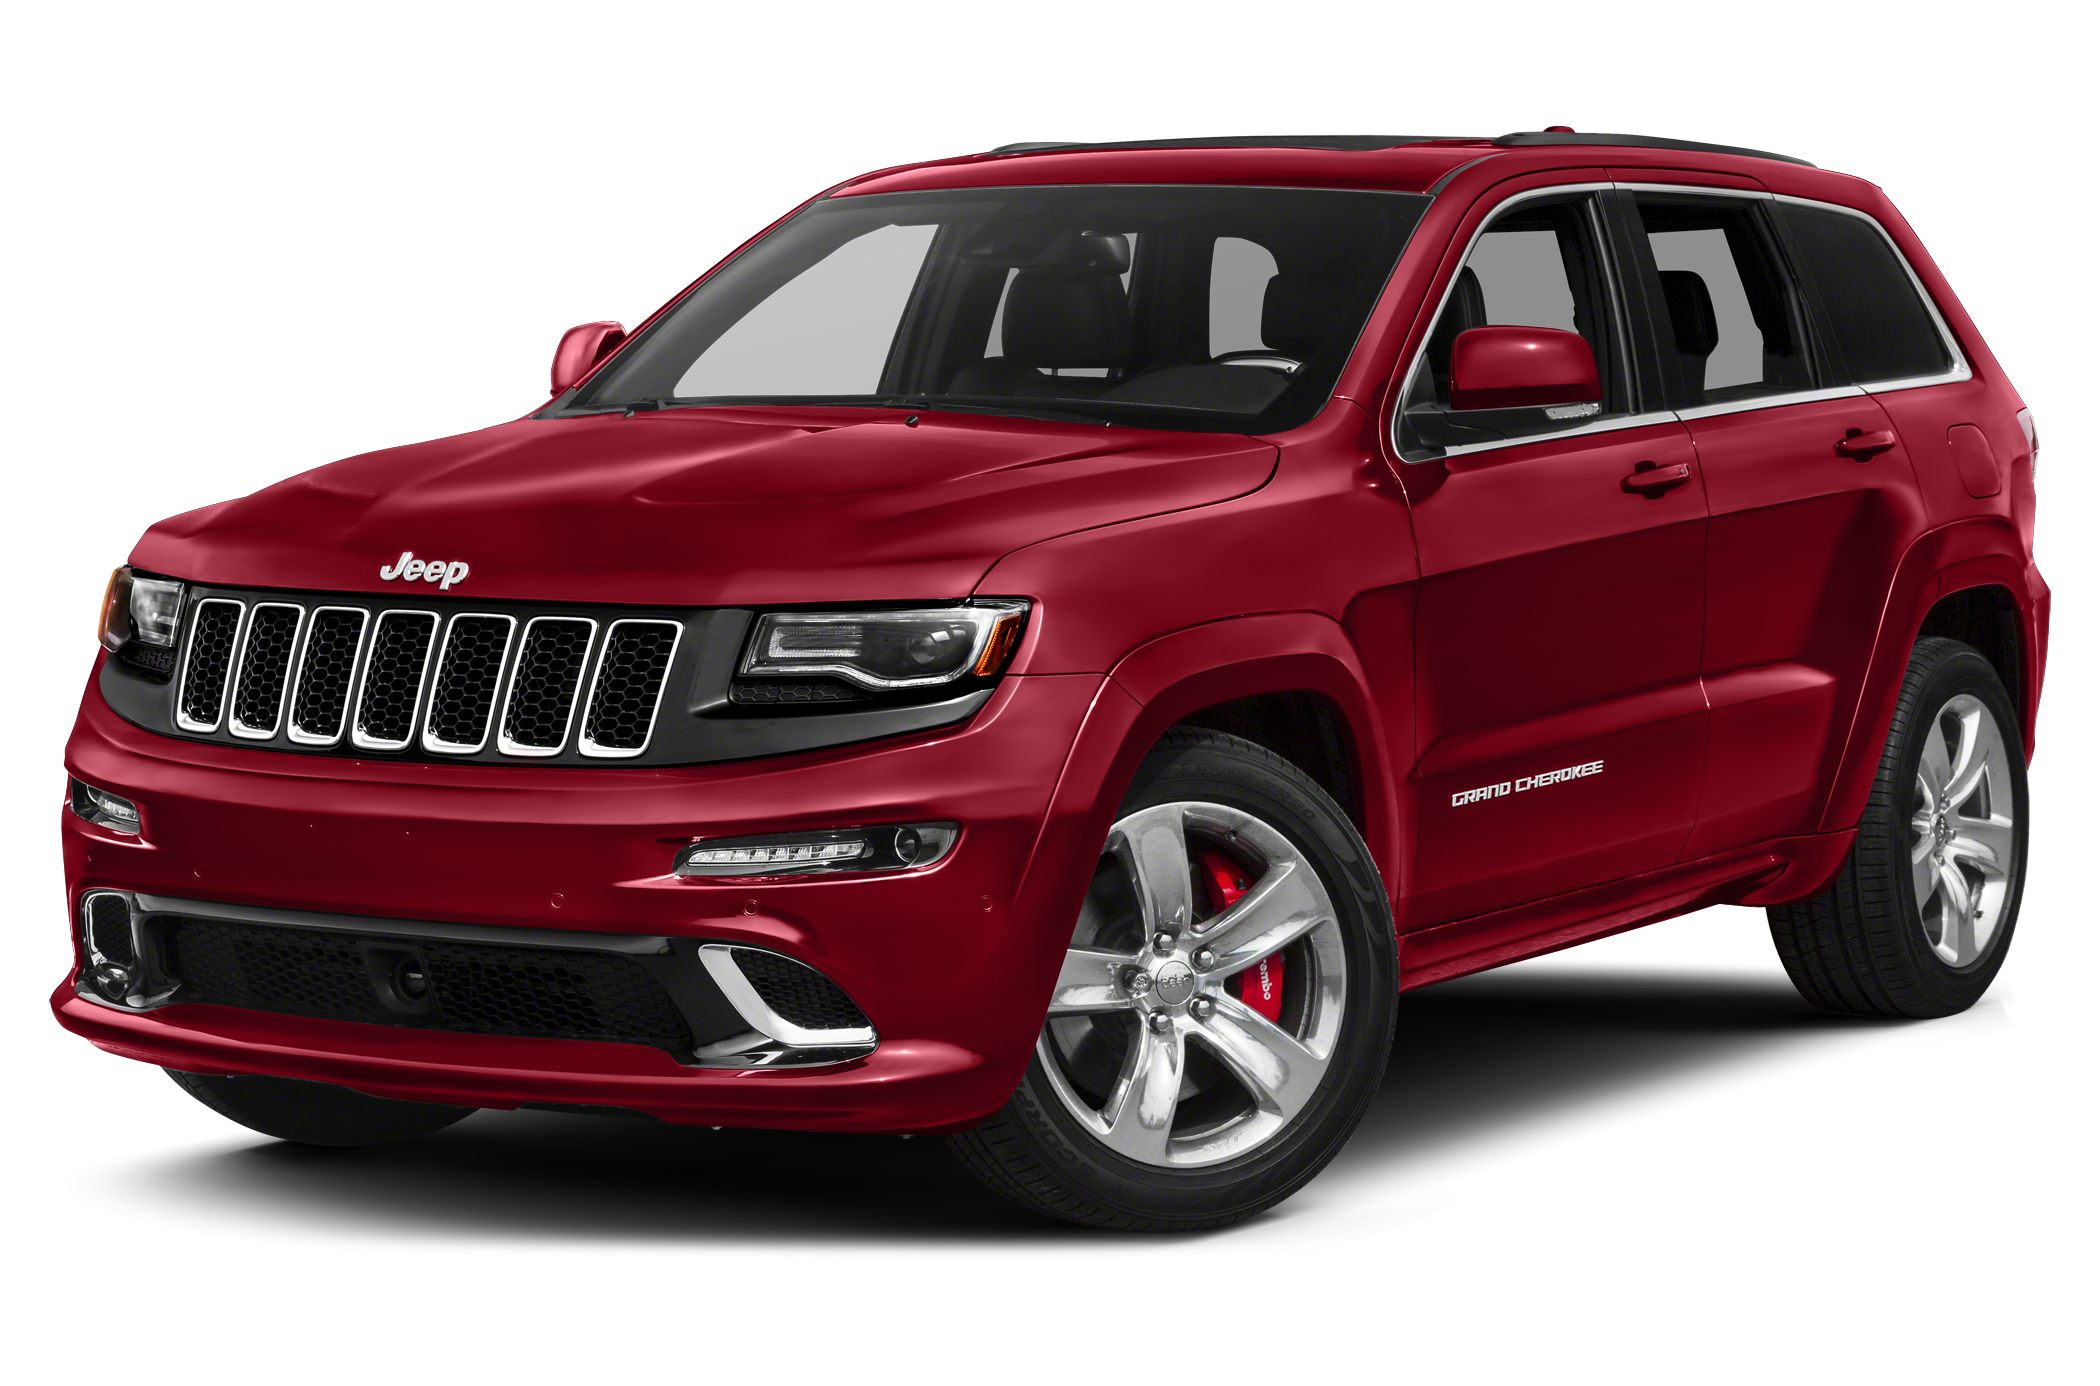 2014 Jeep Grand Cherokee Srt 4dr 4x4 Pictures